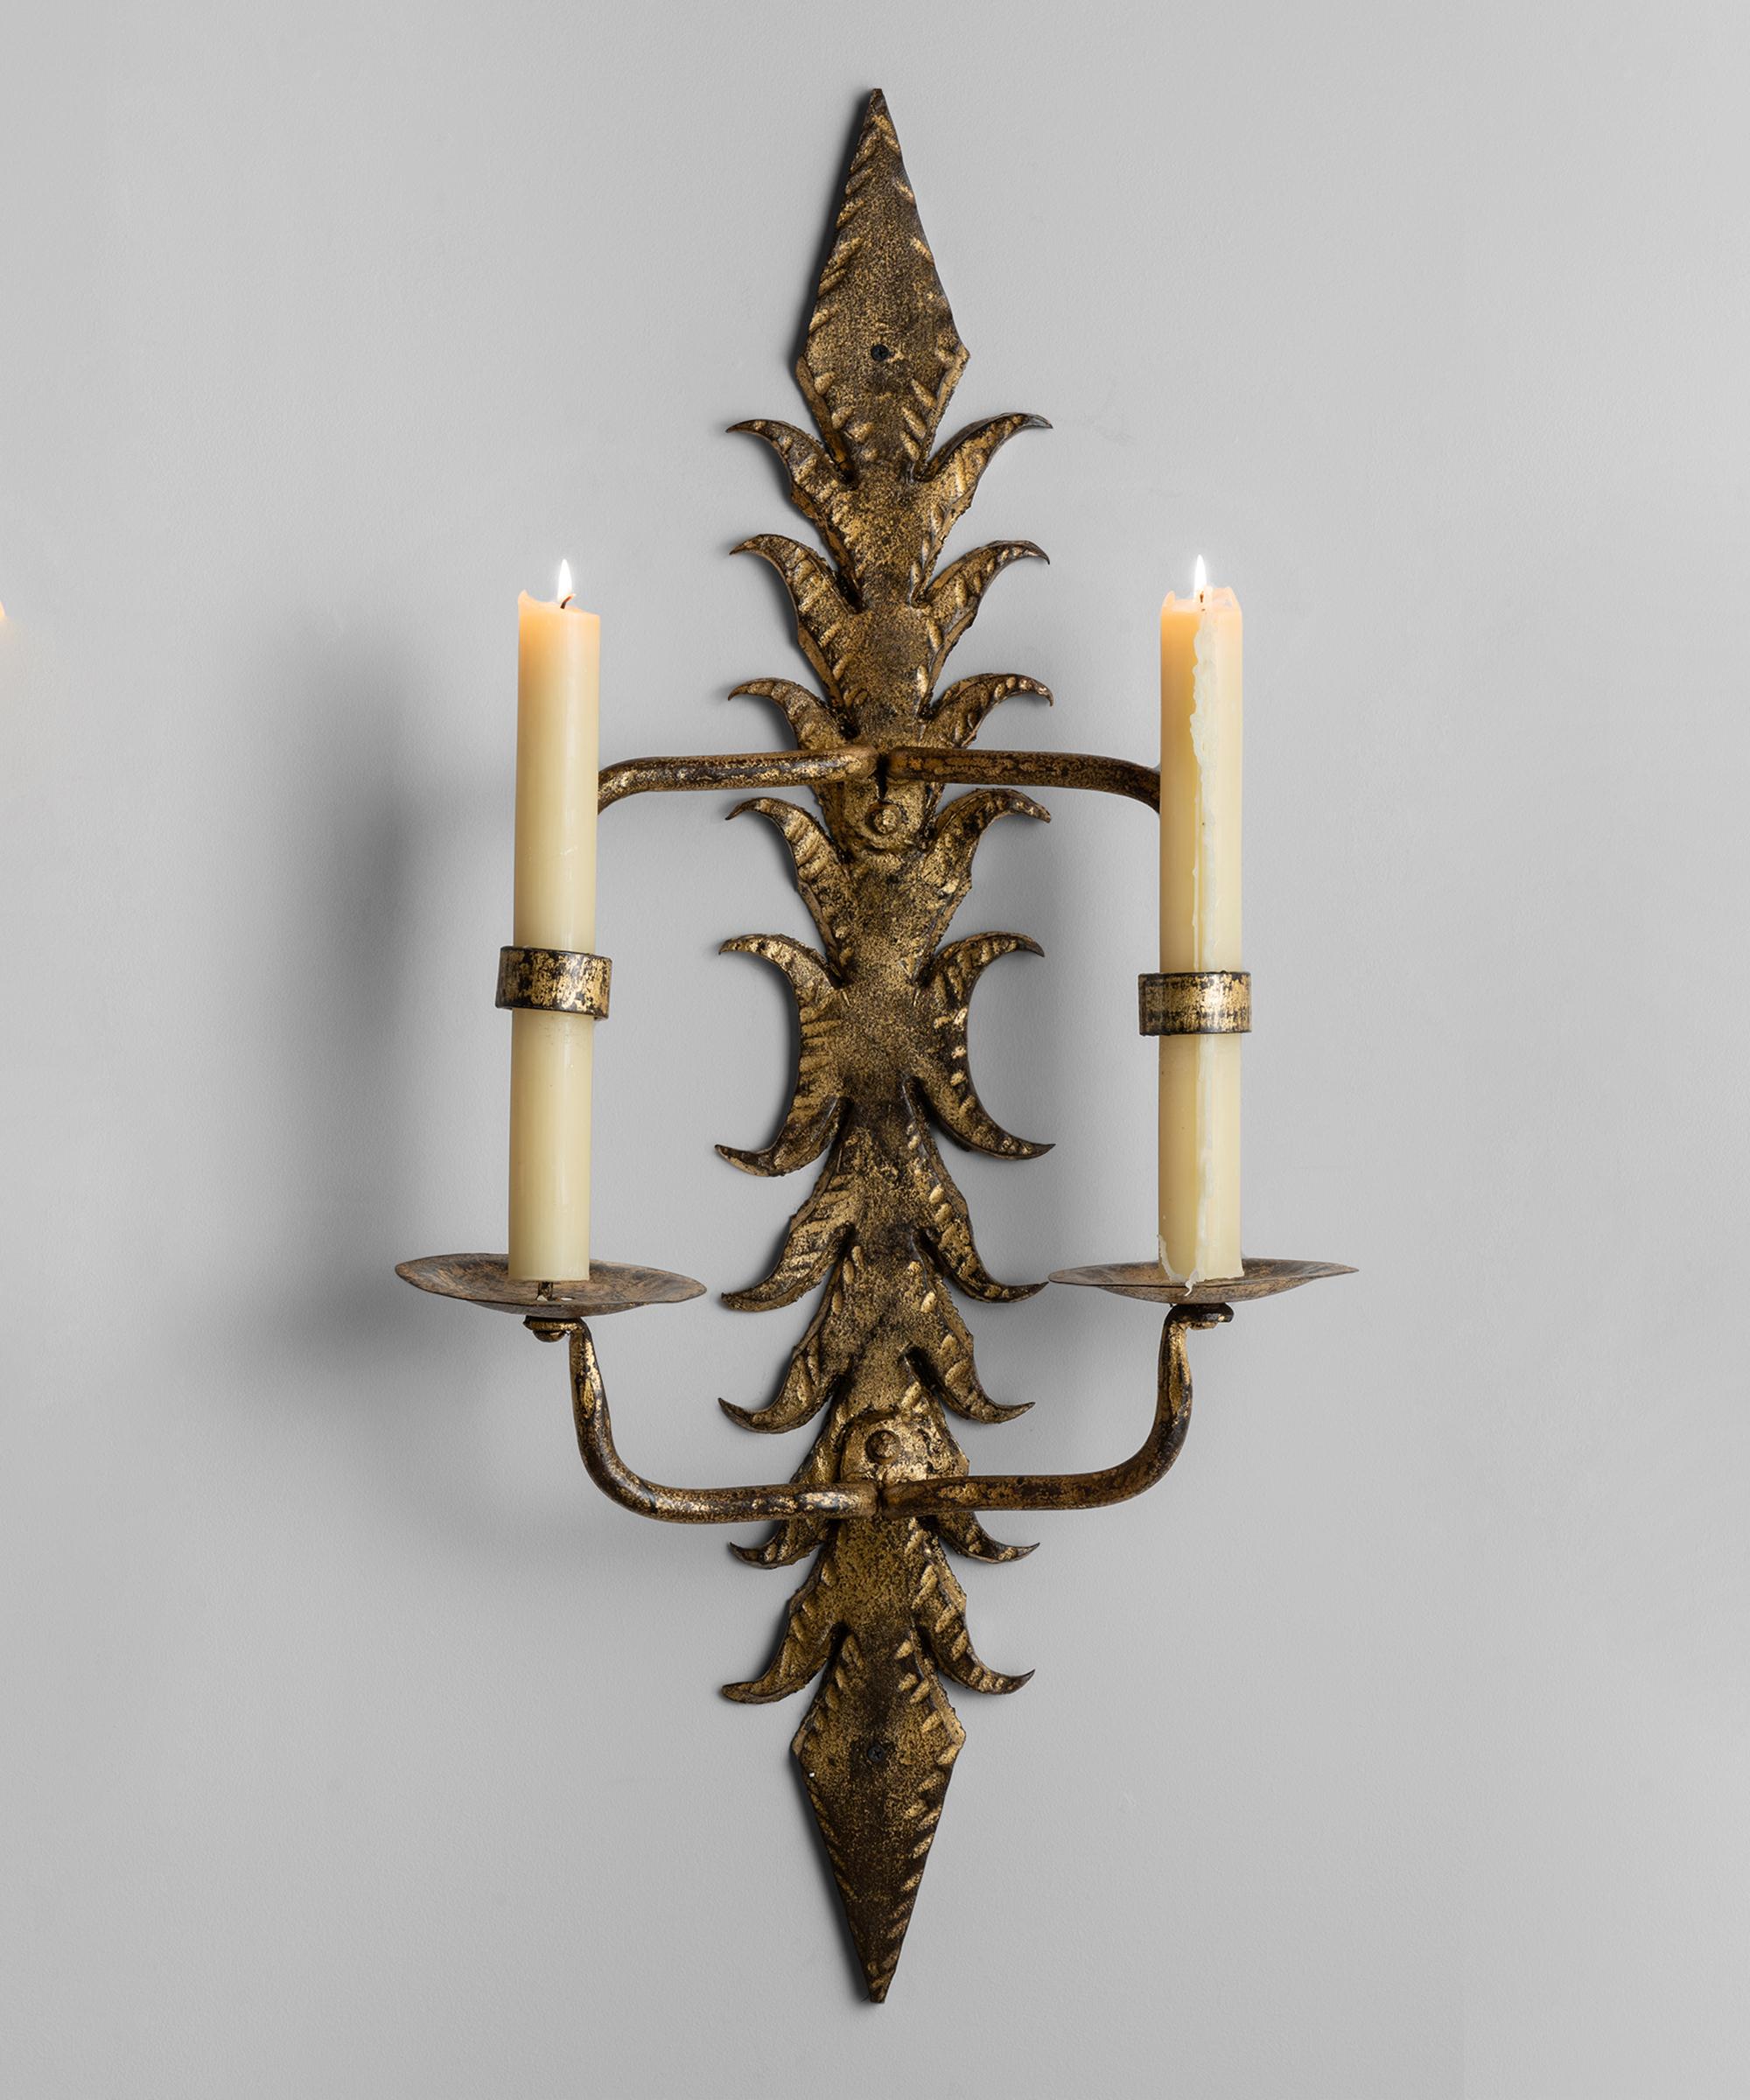 Decorative gilt metal candle lit wall sconce.


Size: 18” W x 7.75